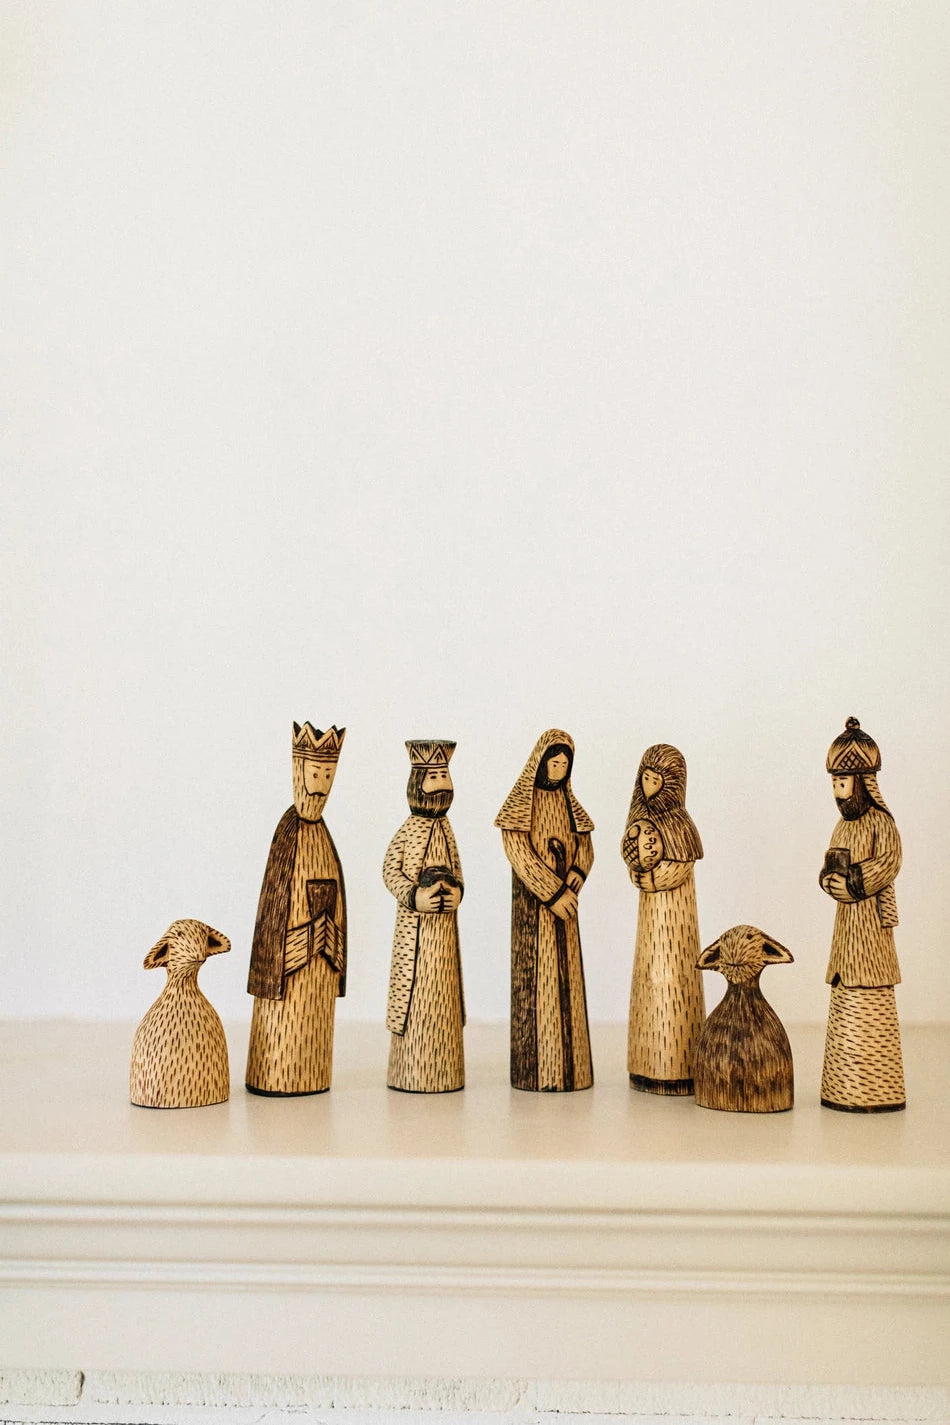 Hand-Carved Wooden Nativity